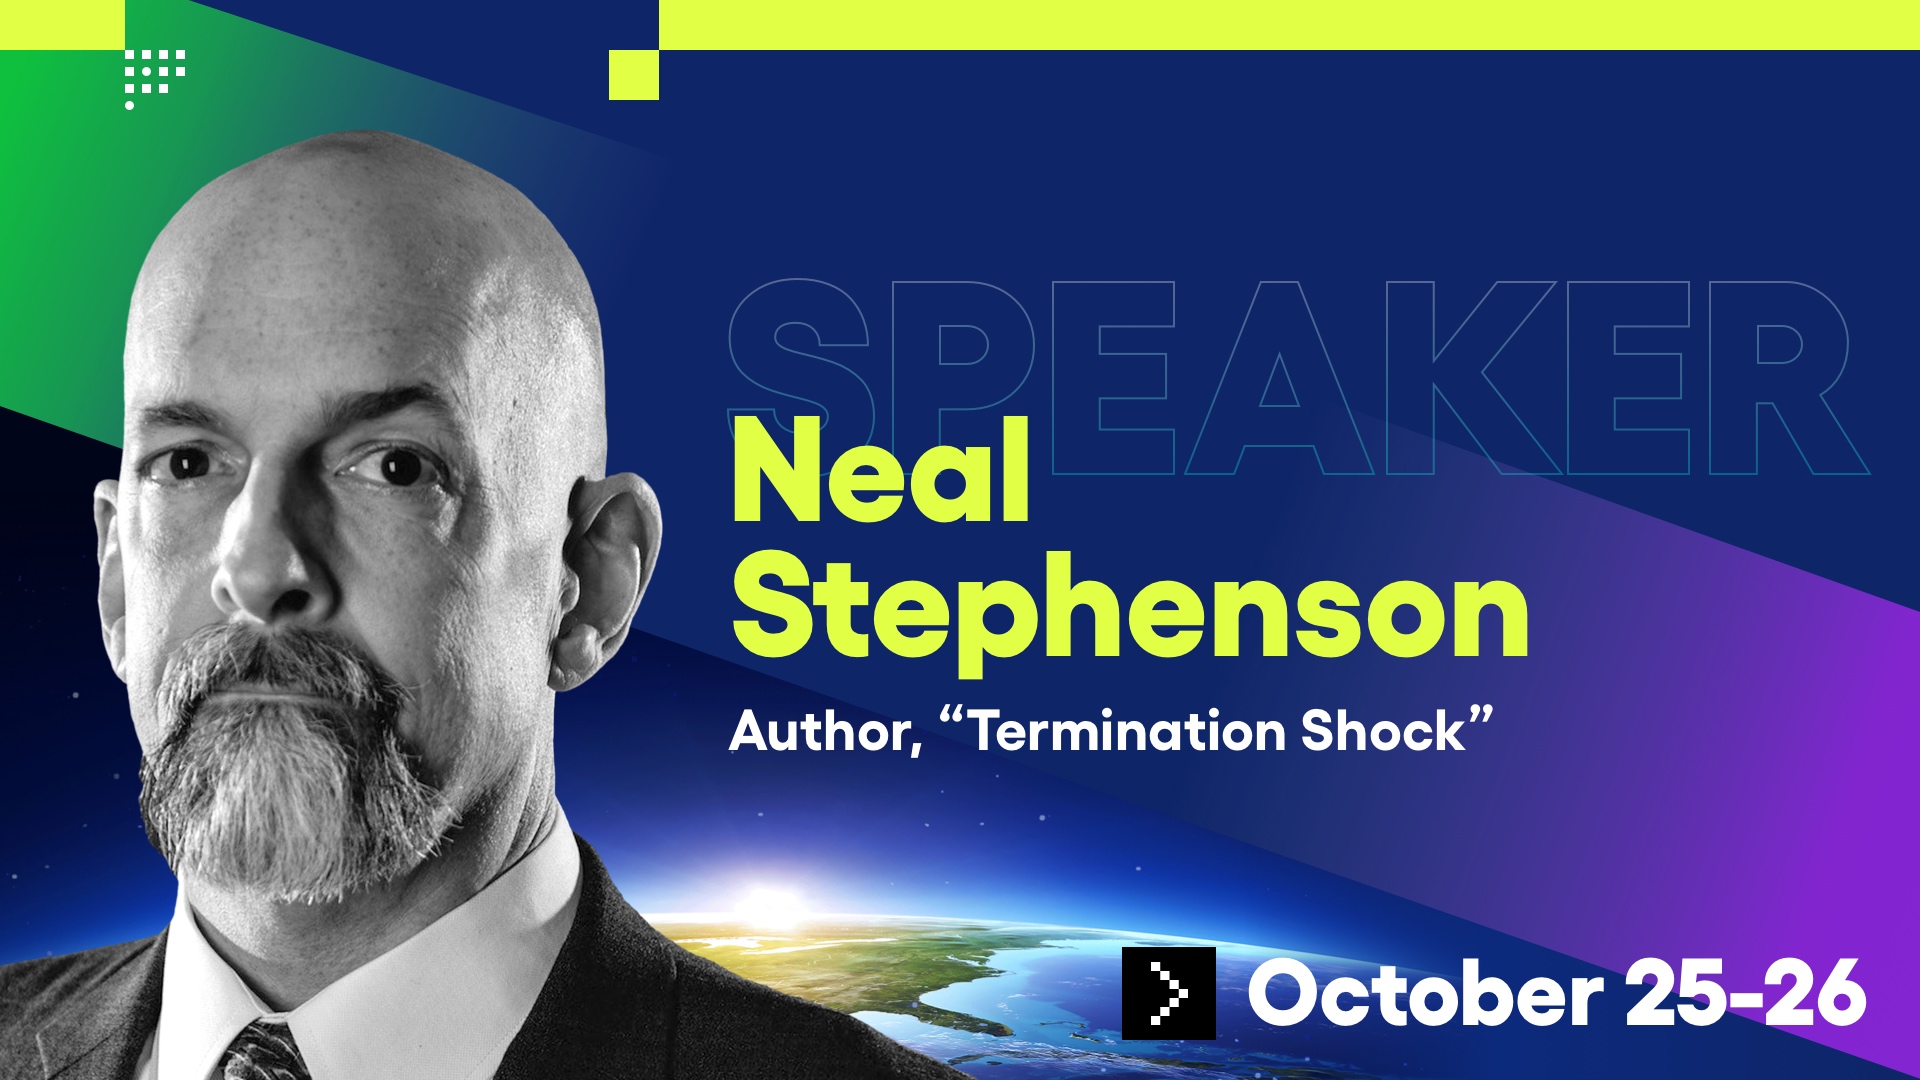 Sci-Fi Author Neal Stephenson Will Speak At the SOSV Climate Tech Summit 2022